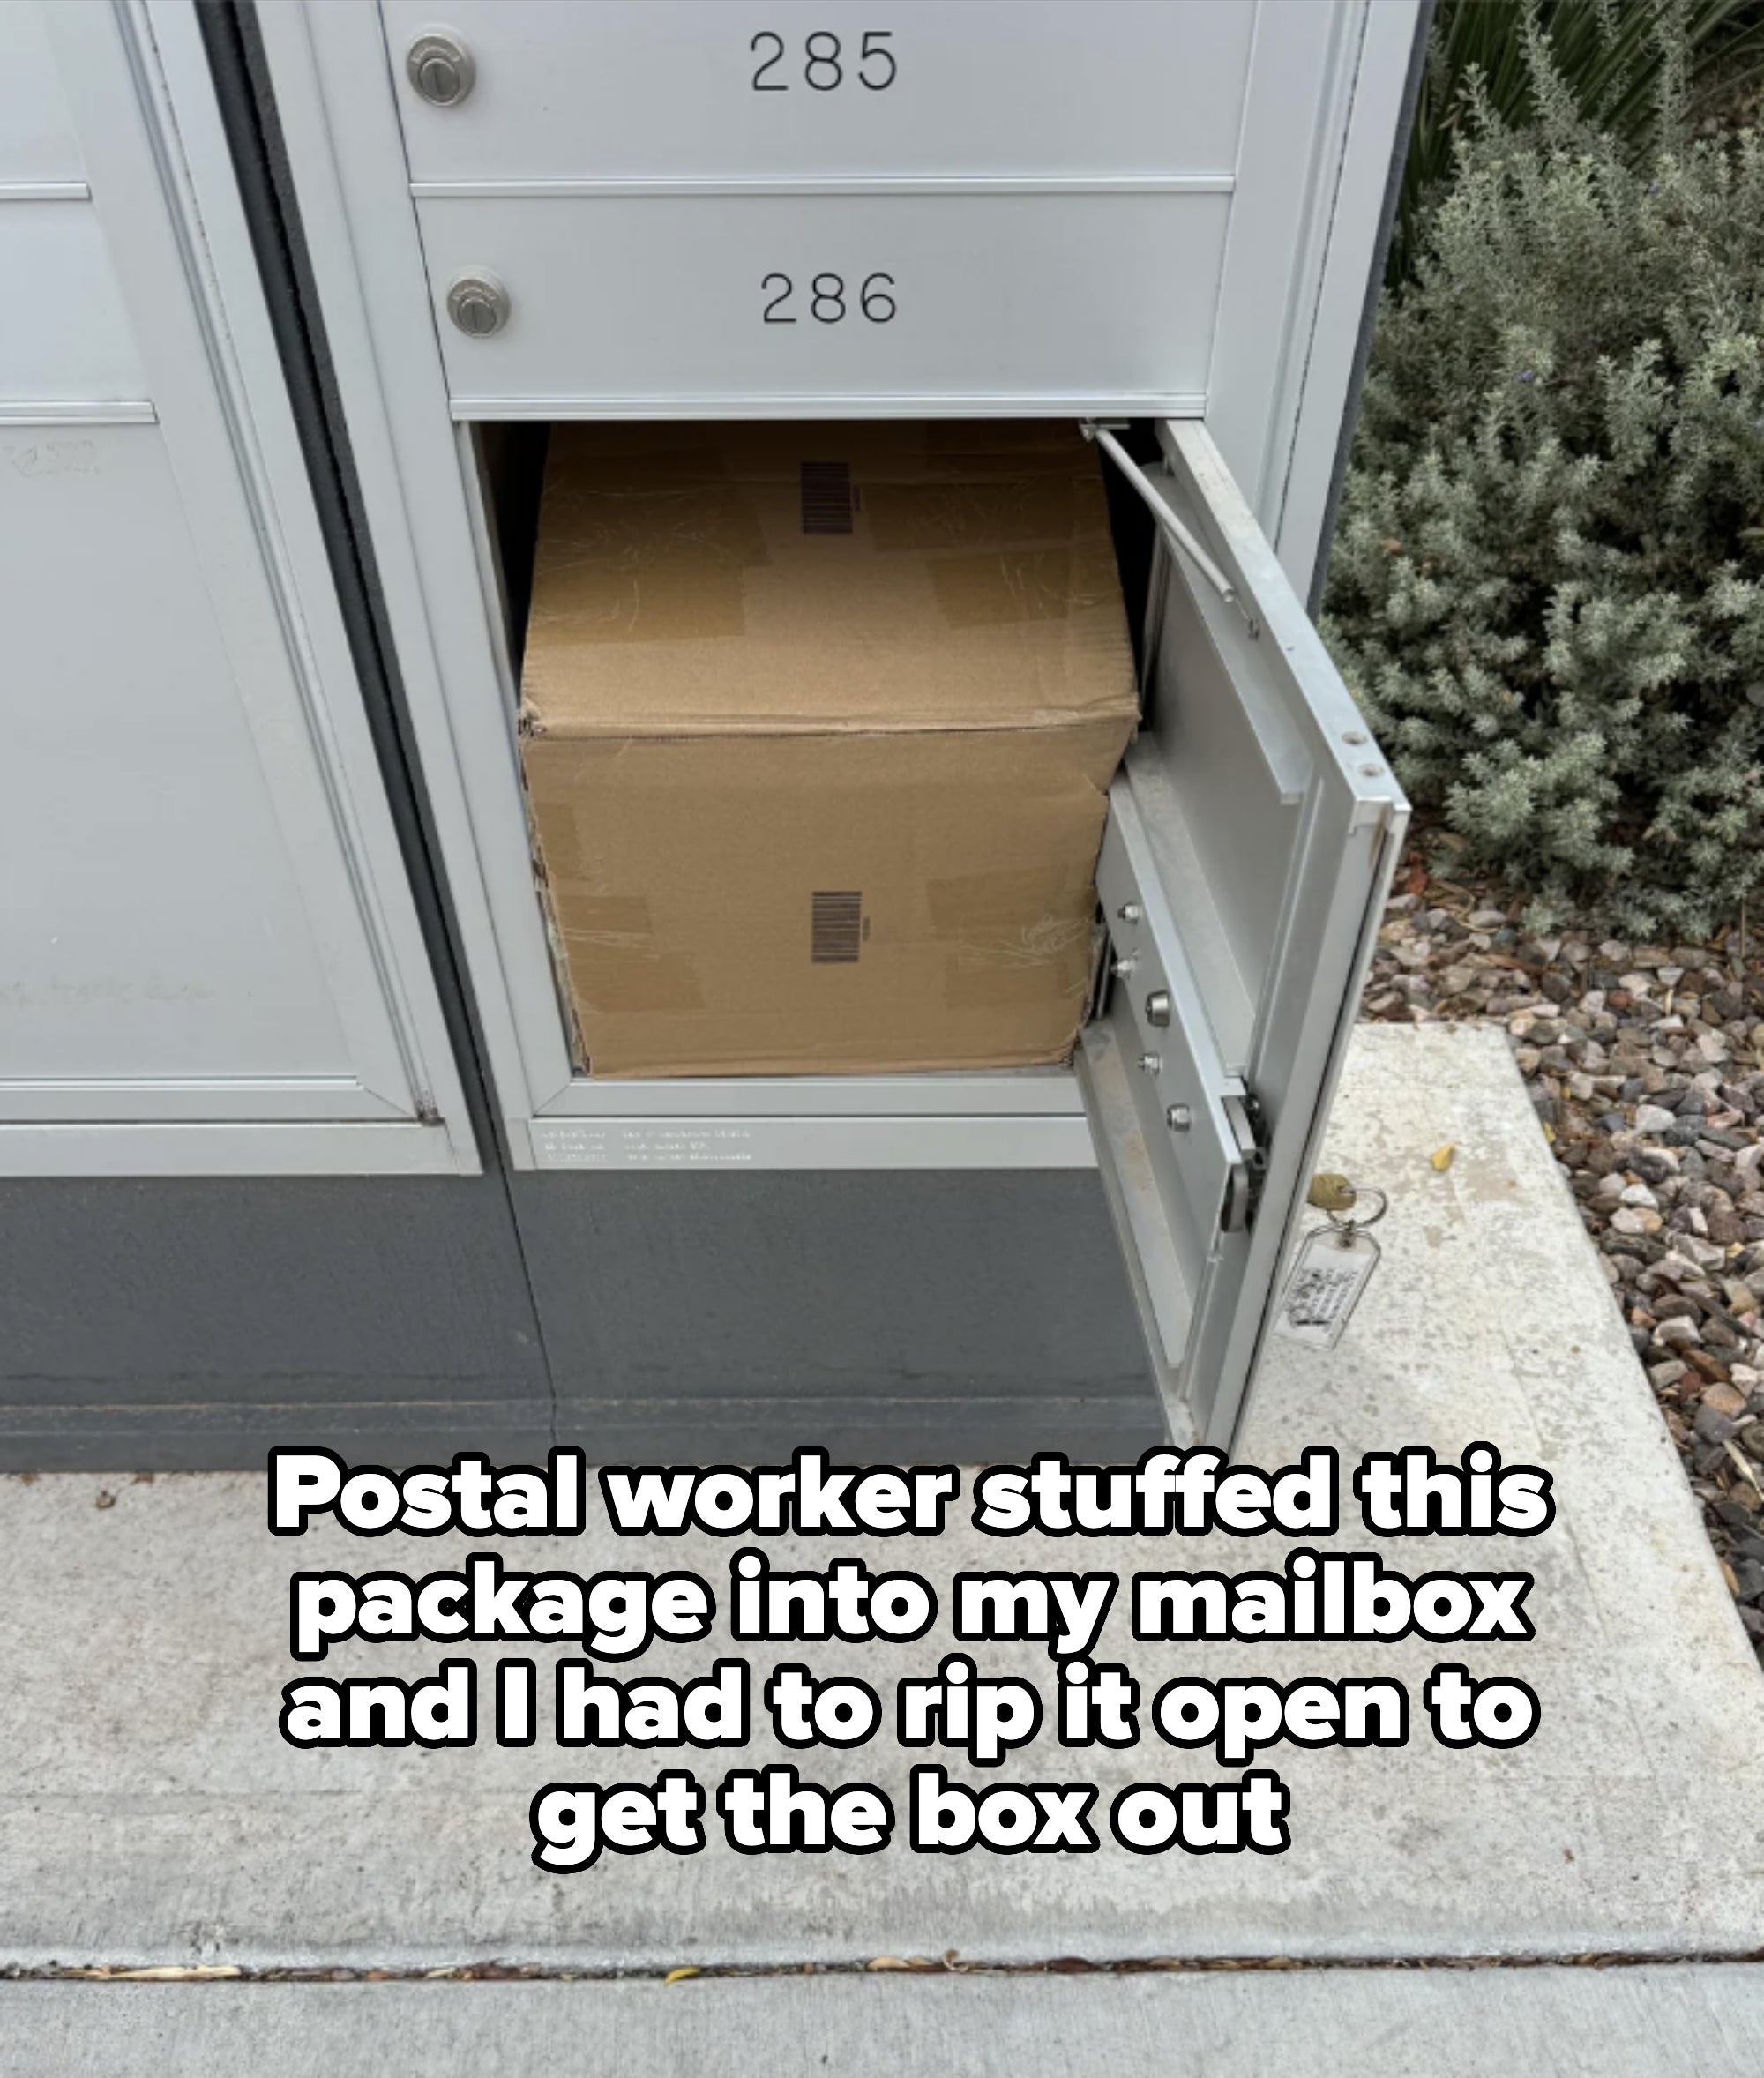 A mailbox with the door open revealing a large package inside. The mailbox is numbered 286